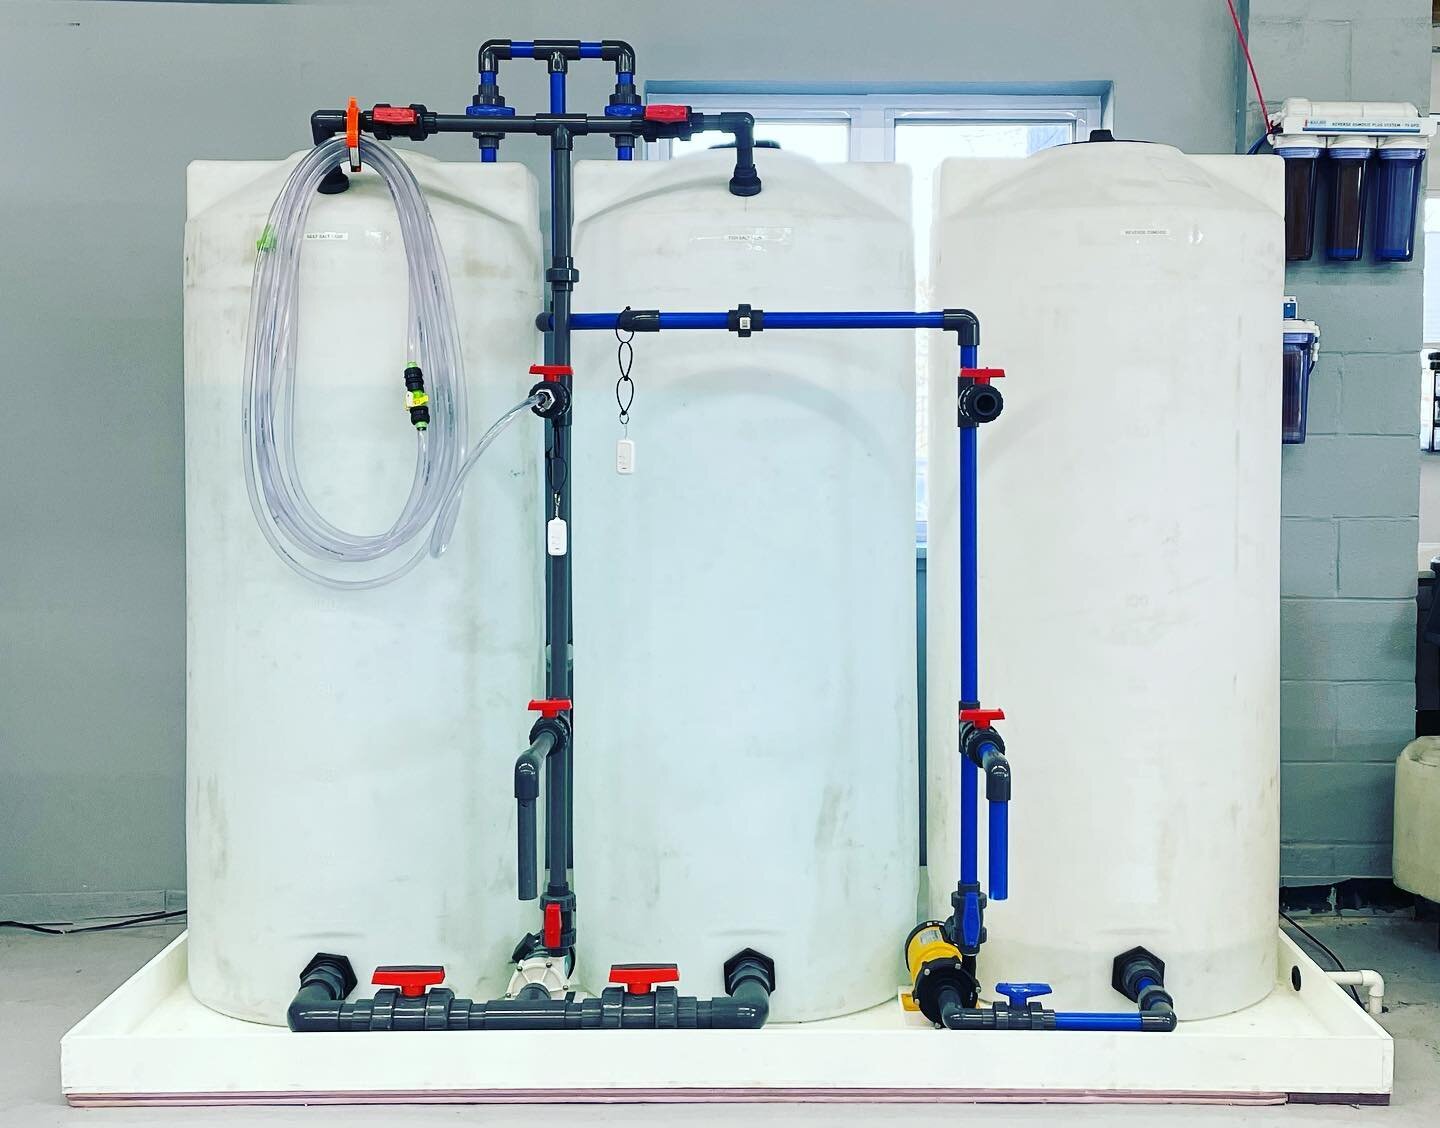 Our main reverse osmosis water production and saltwater mixing station at our facility. 

#aquarium #fish #fishtank #aquascape #aquariumhobby #reef #aquascaping #freshwateraquarium #plantedtank #aquariums #aquariumfish #nature #freshwater #plantedaqu